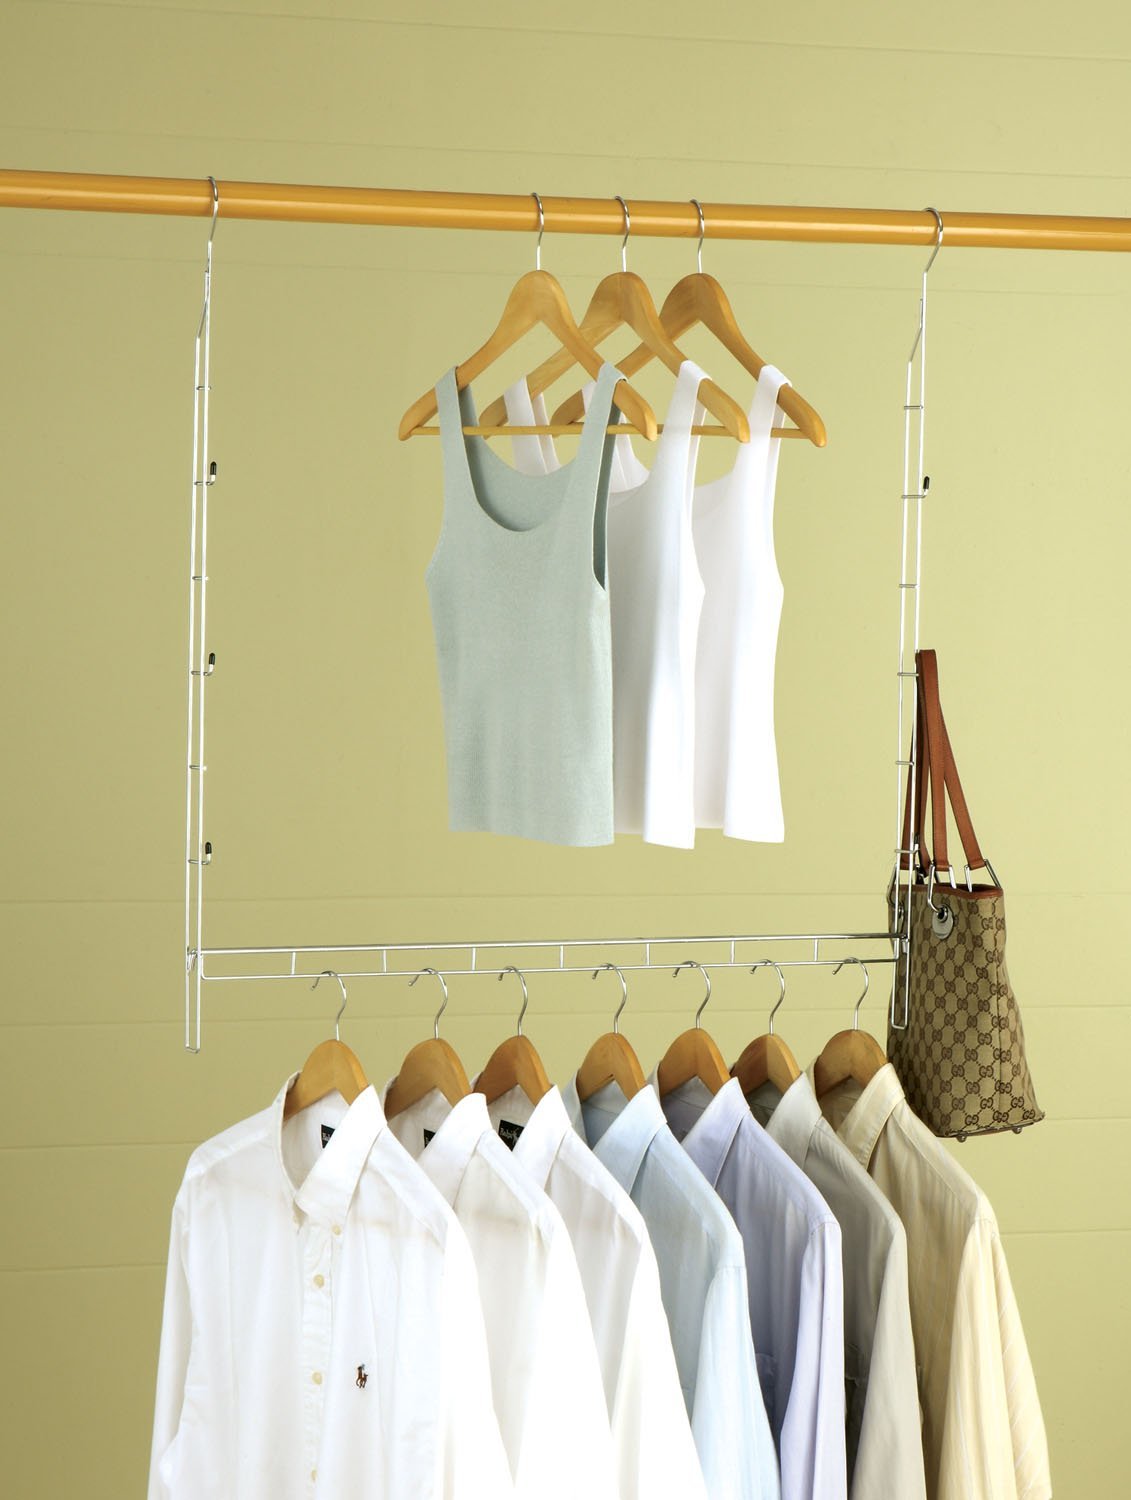 15 Fantastic Items for Organizing Your Home | www.growingupgabel.com